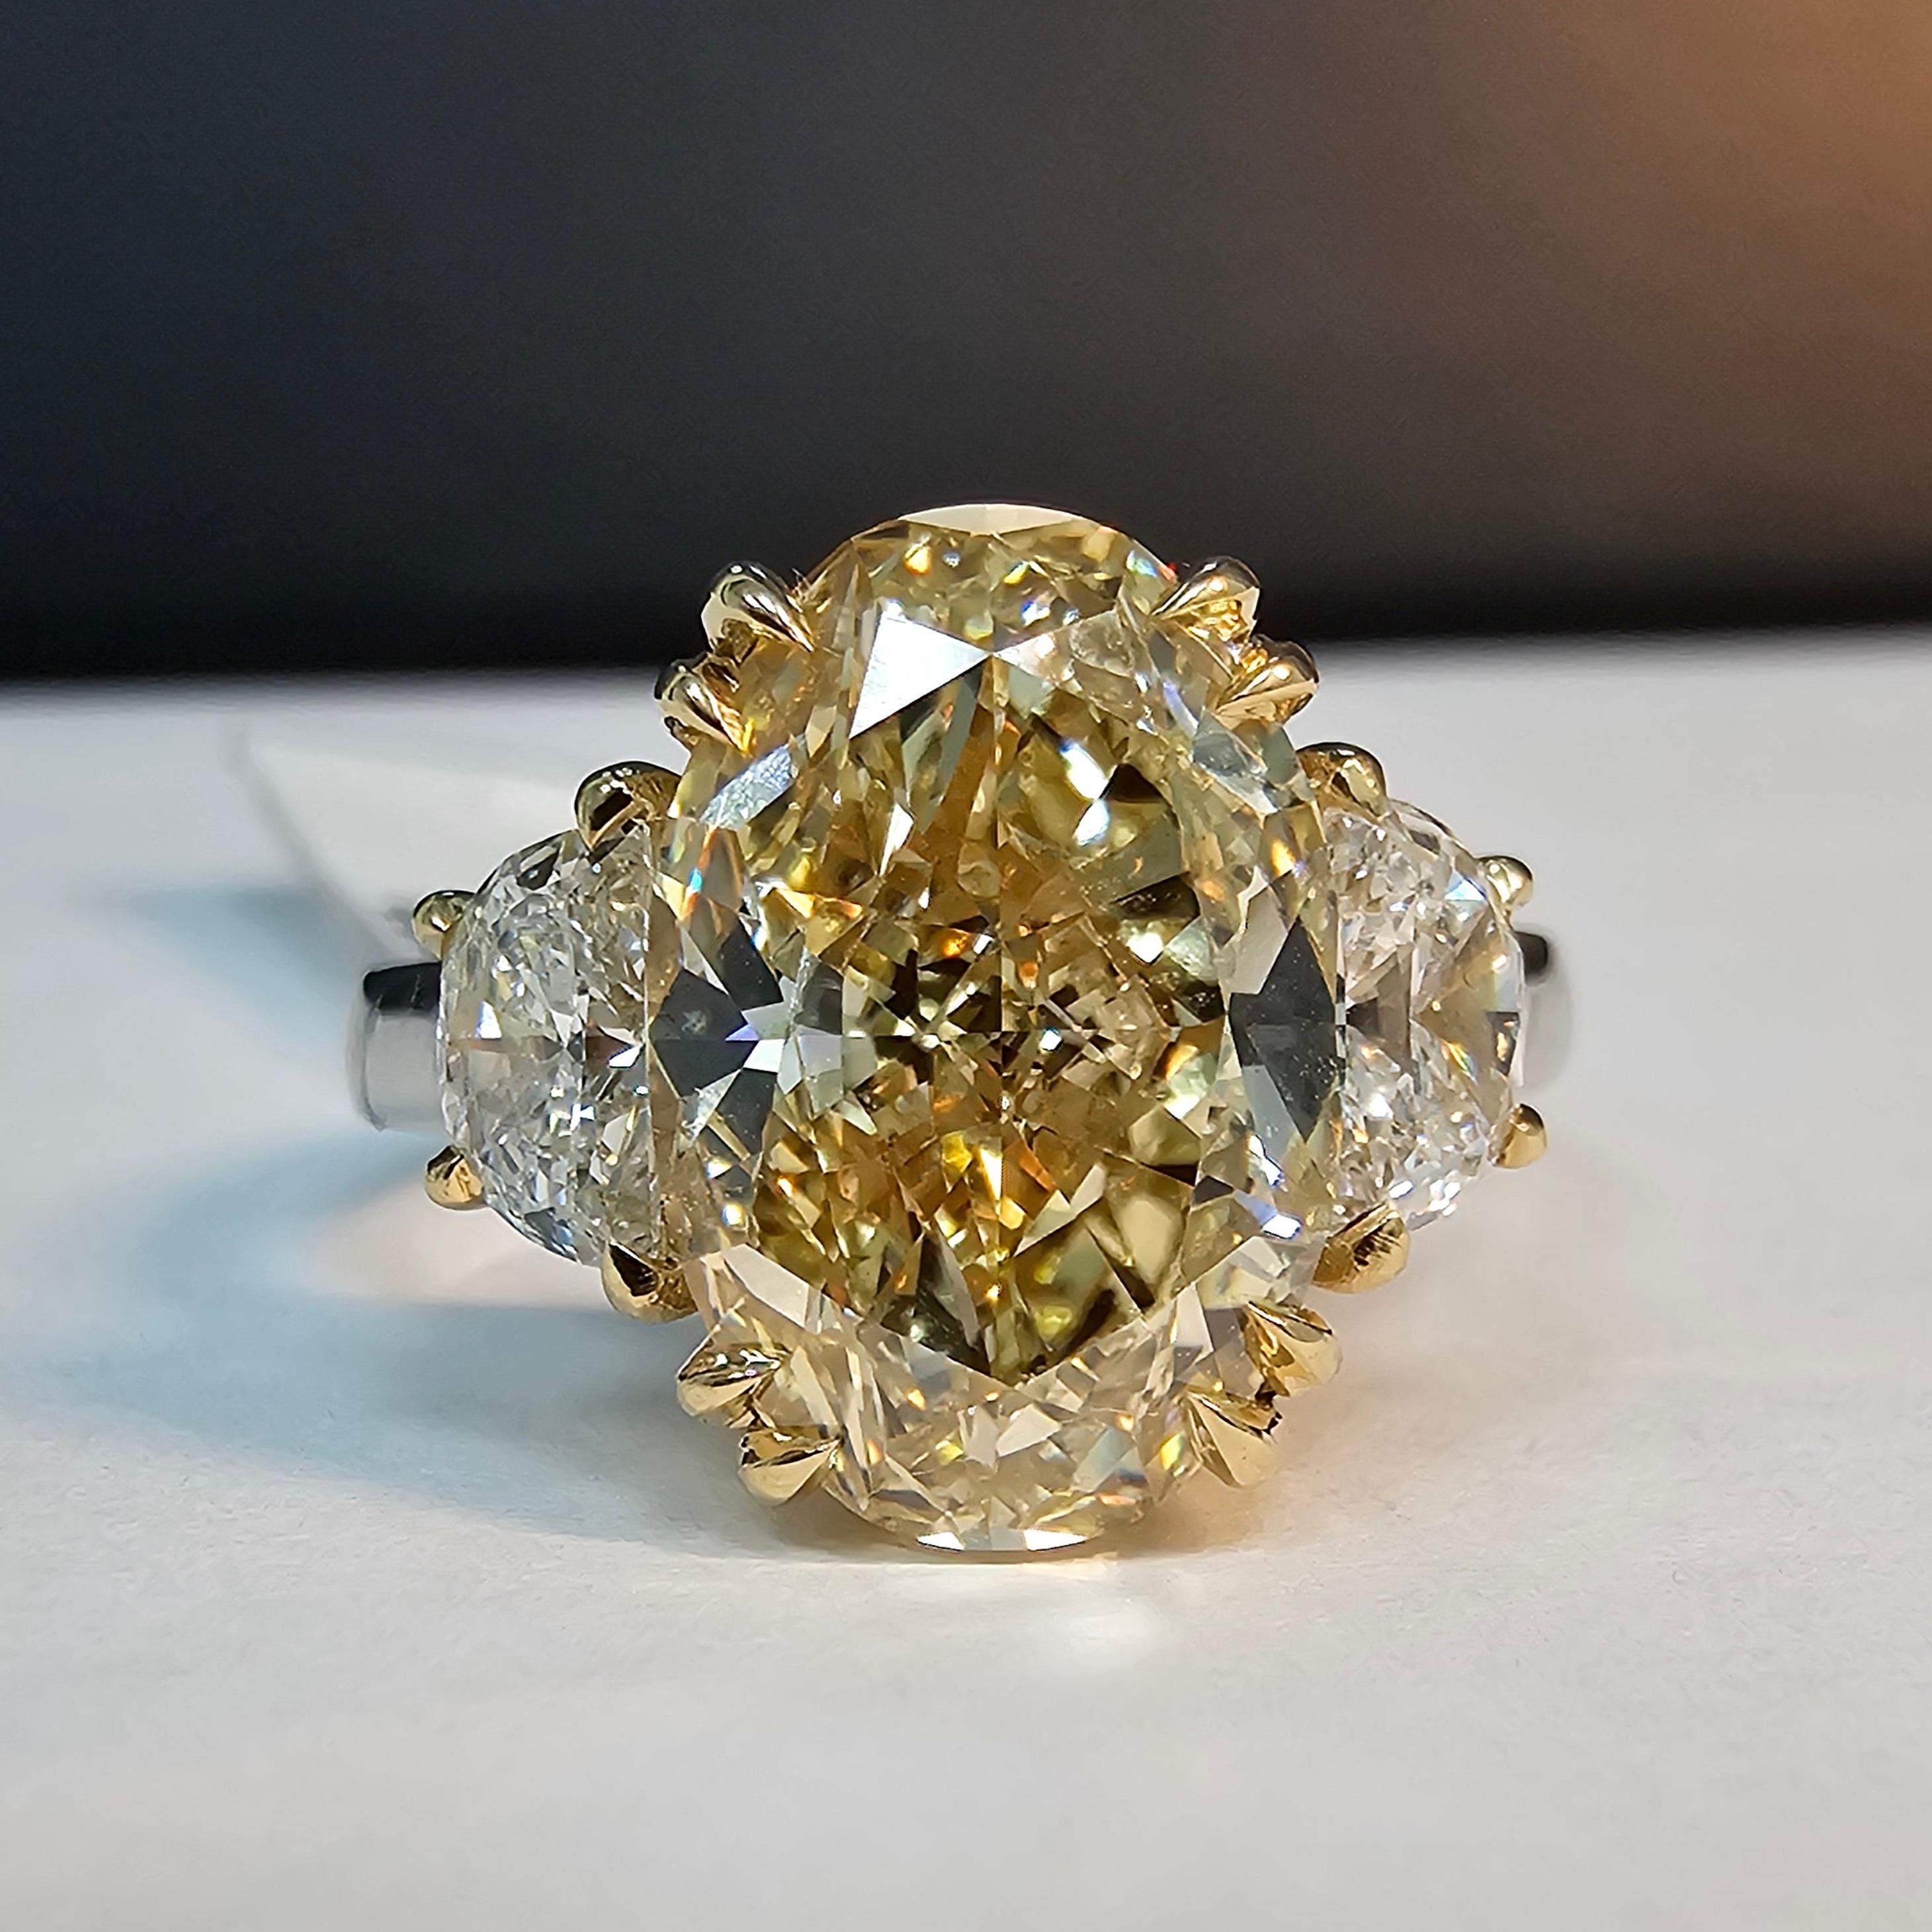 This beautiful ring features a finely cut and vibrant four-and-a-half-carat fancy brownish-yellow oval diamond, set in platinum and yellow gold with double claw prongs. It's internally flawless and has a lovely golden color, with no bow tie